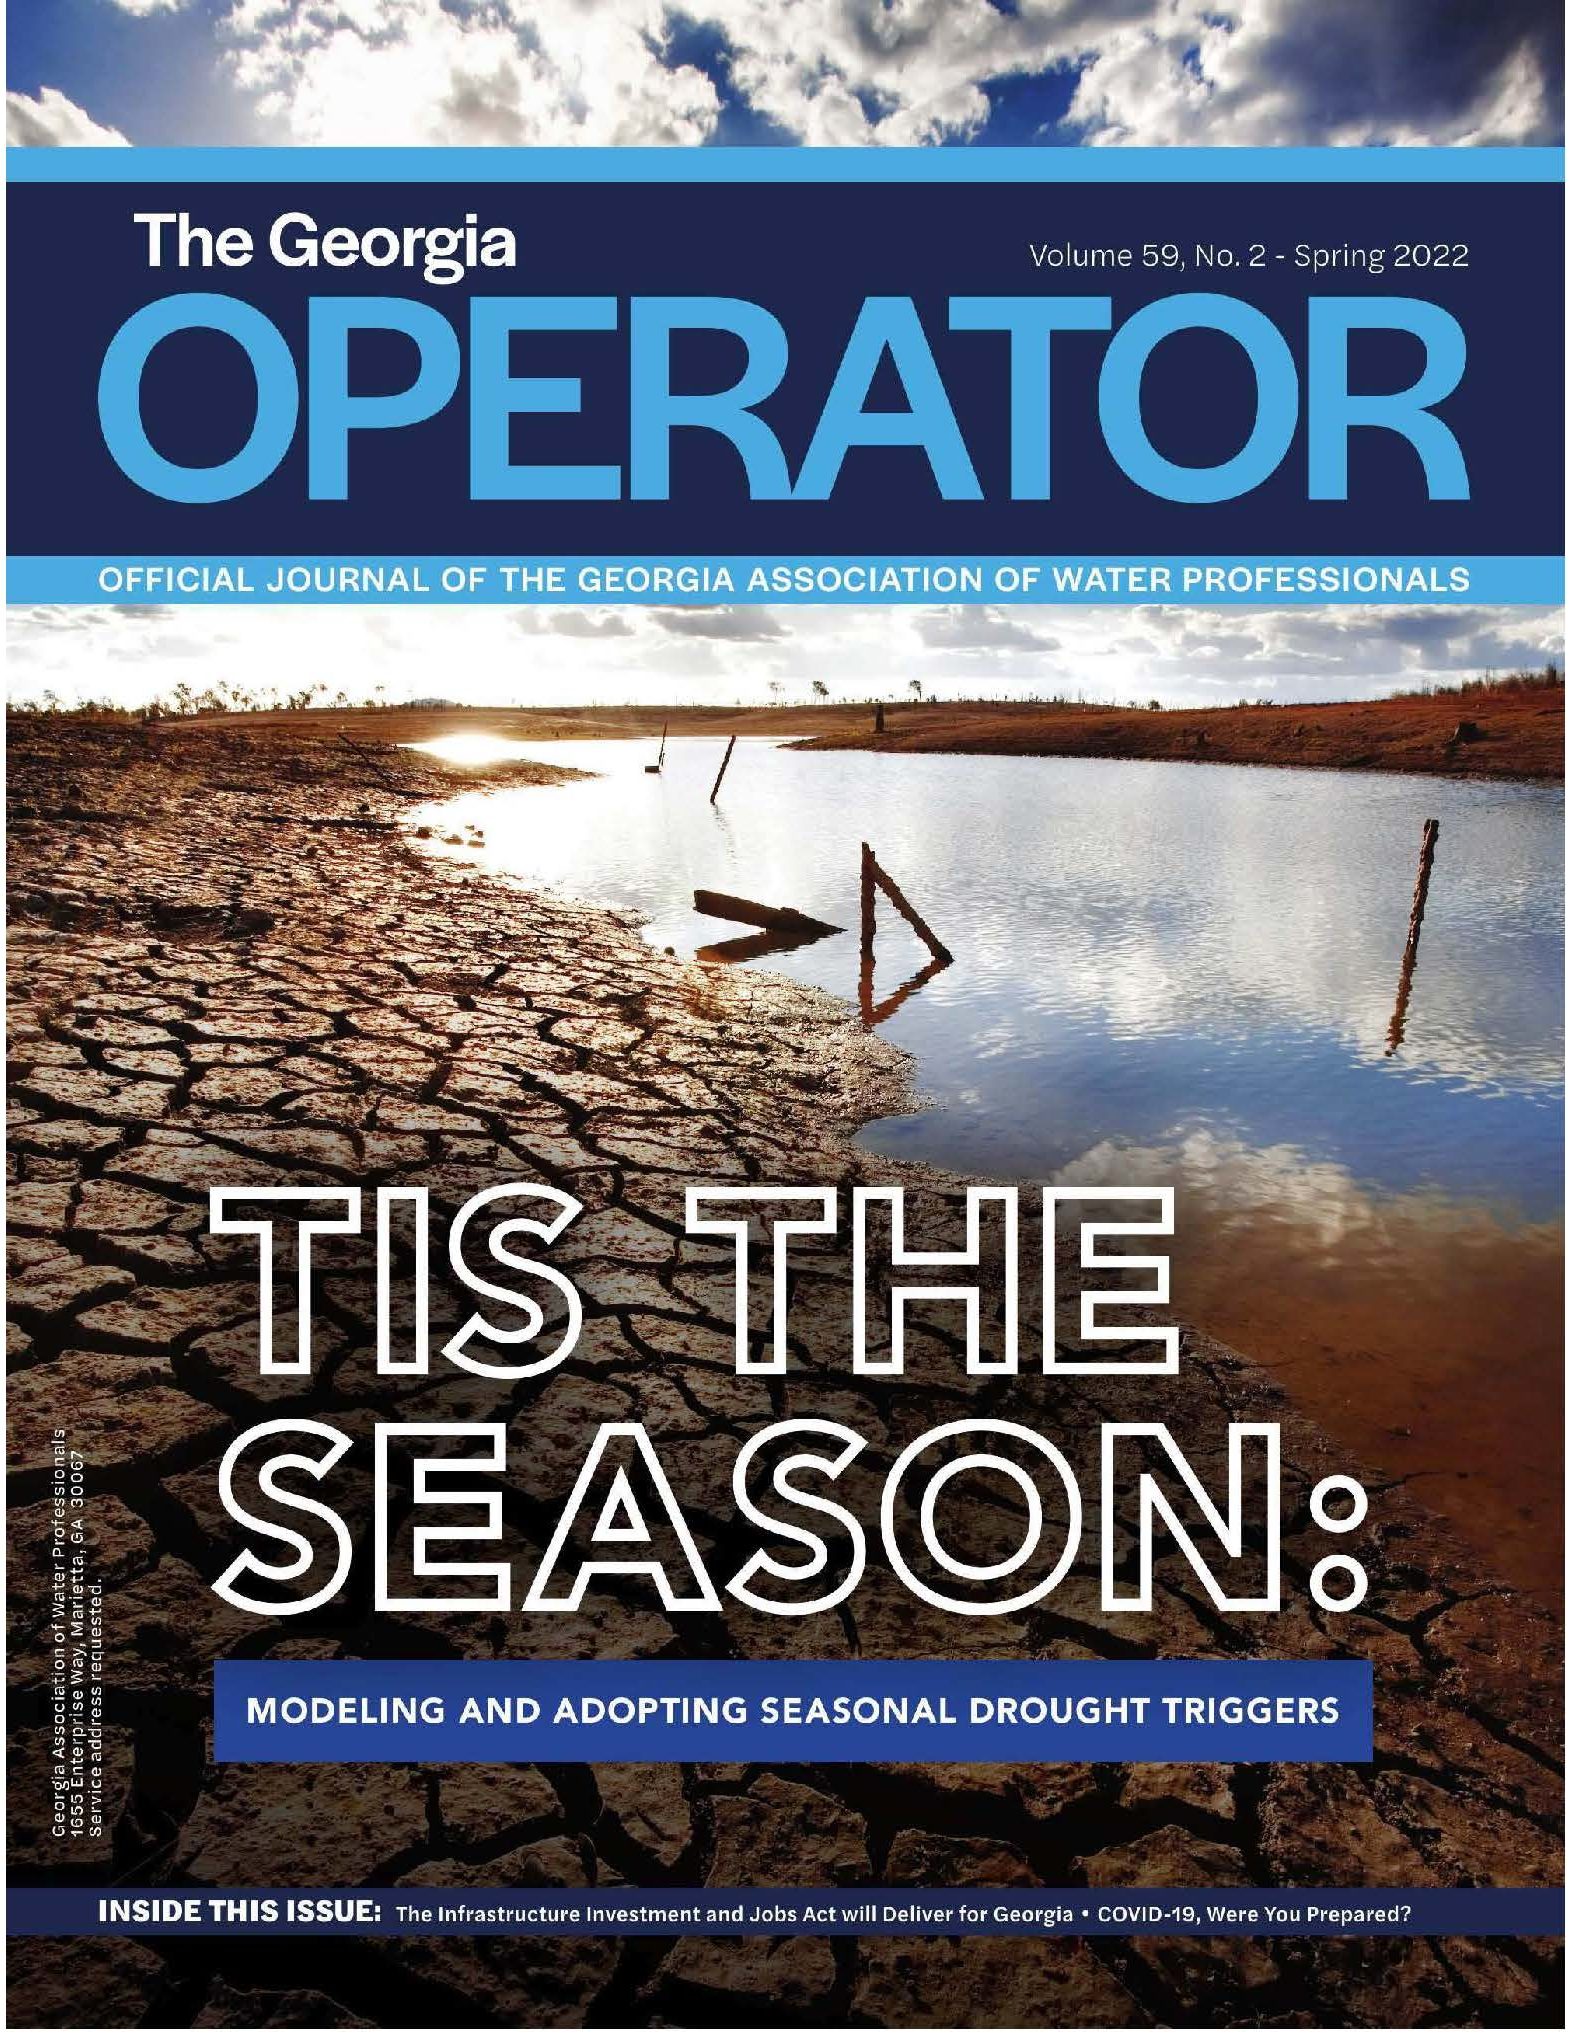 The cover of the Georgia Operator magazine with a photo of a mostly dried-up lake